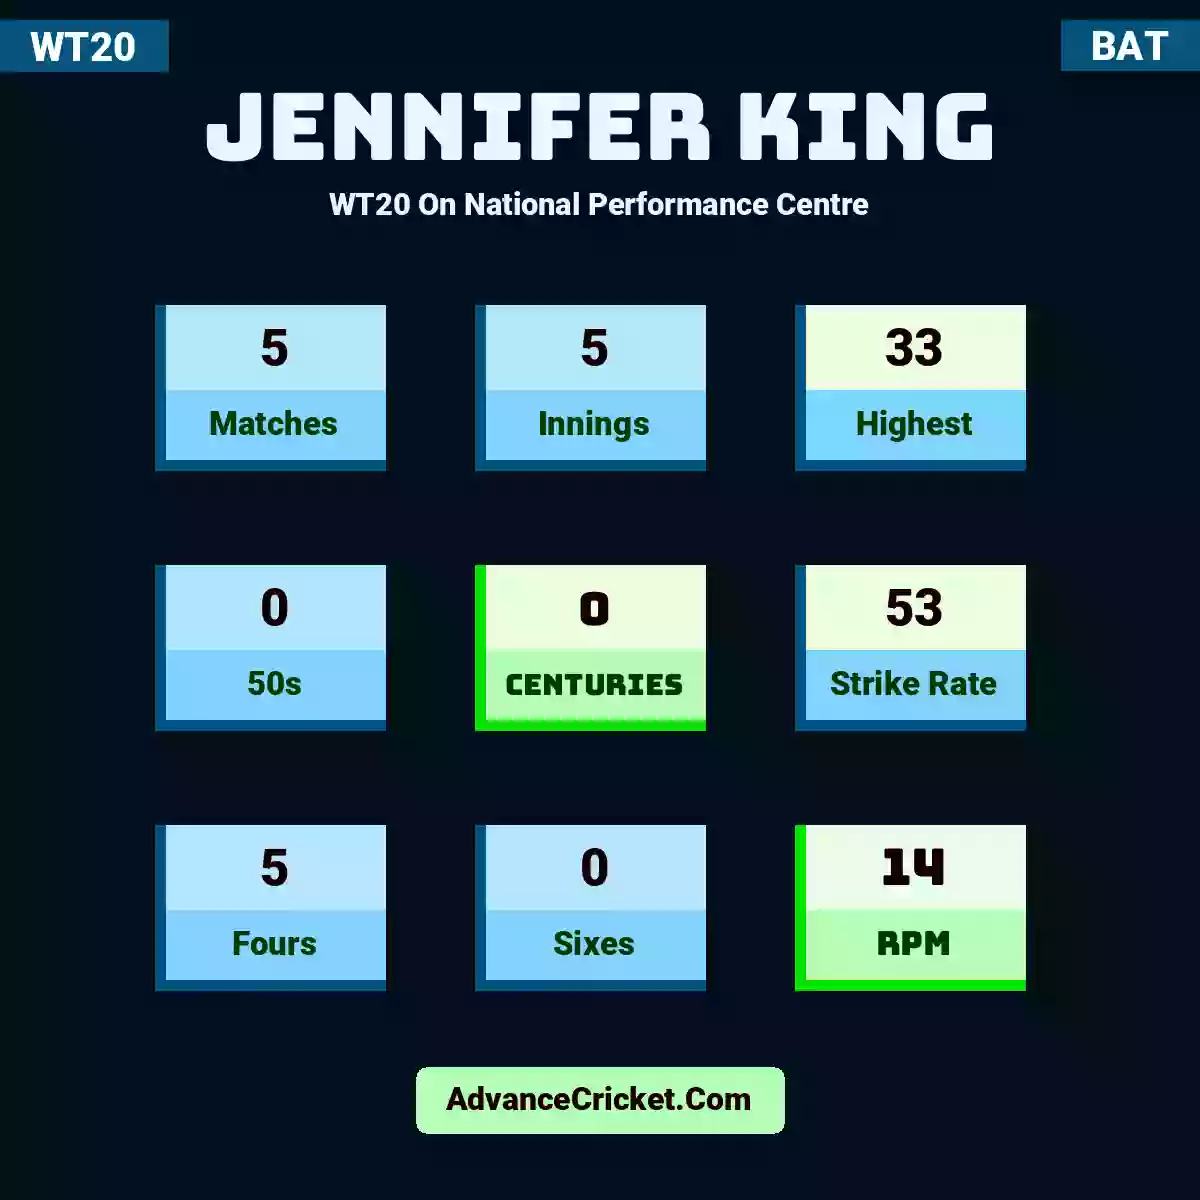 Jennifer King WT20  On National Performance Centre, Jennifer King played 5 matches, scored 33 runs as highest, 0 half-centuries, and 0 centuries, with a strike rate of 53. J.King hit 5 fours and 0 sixes, with an RPM of 14.